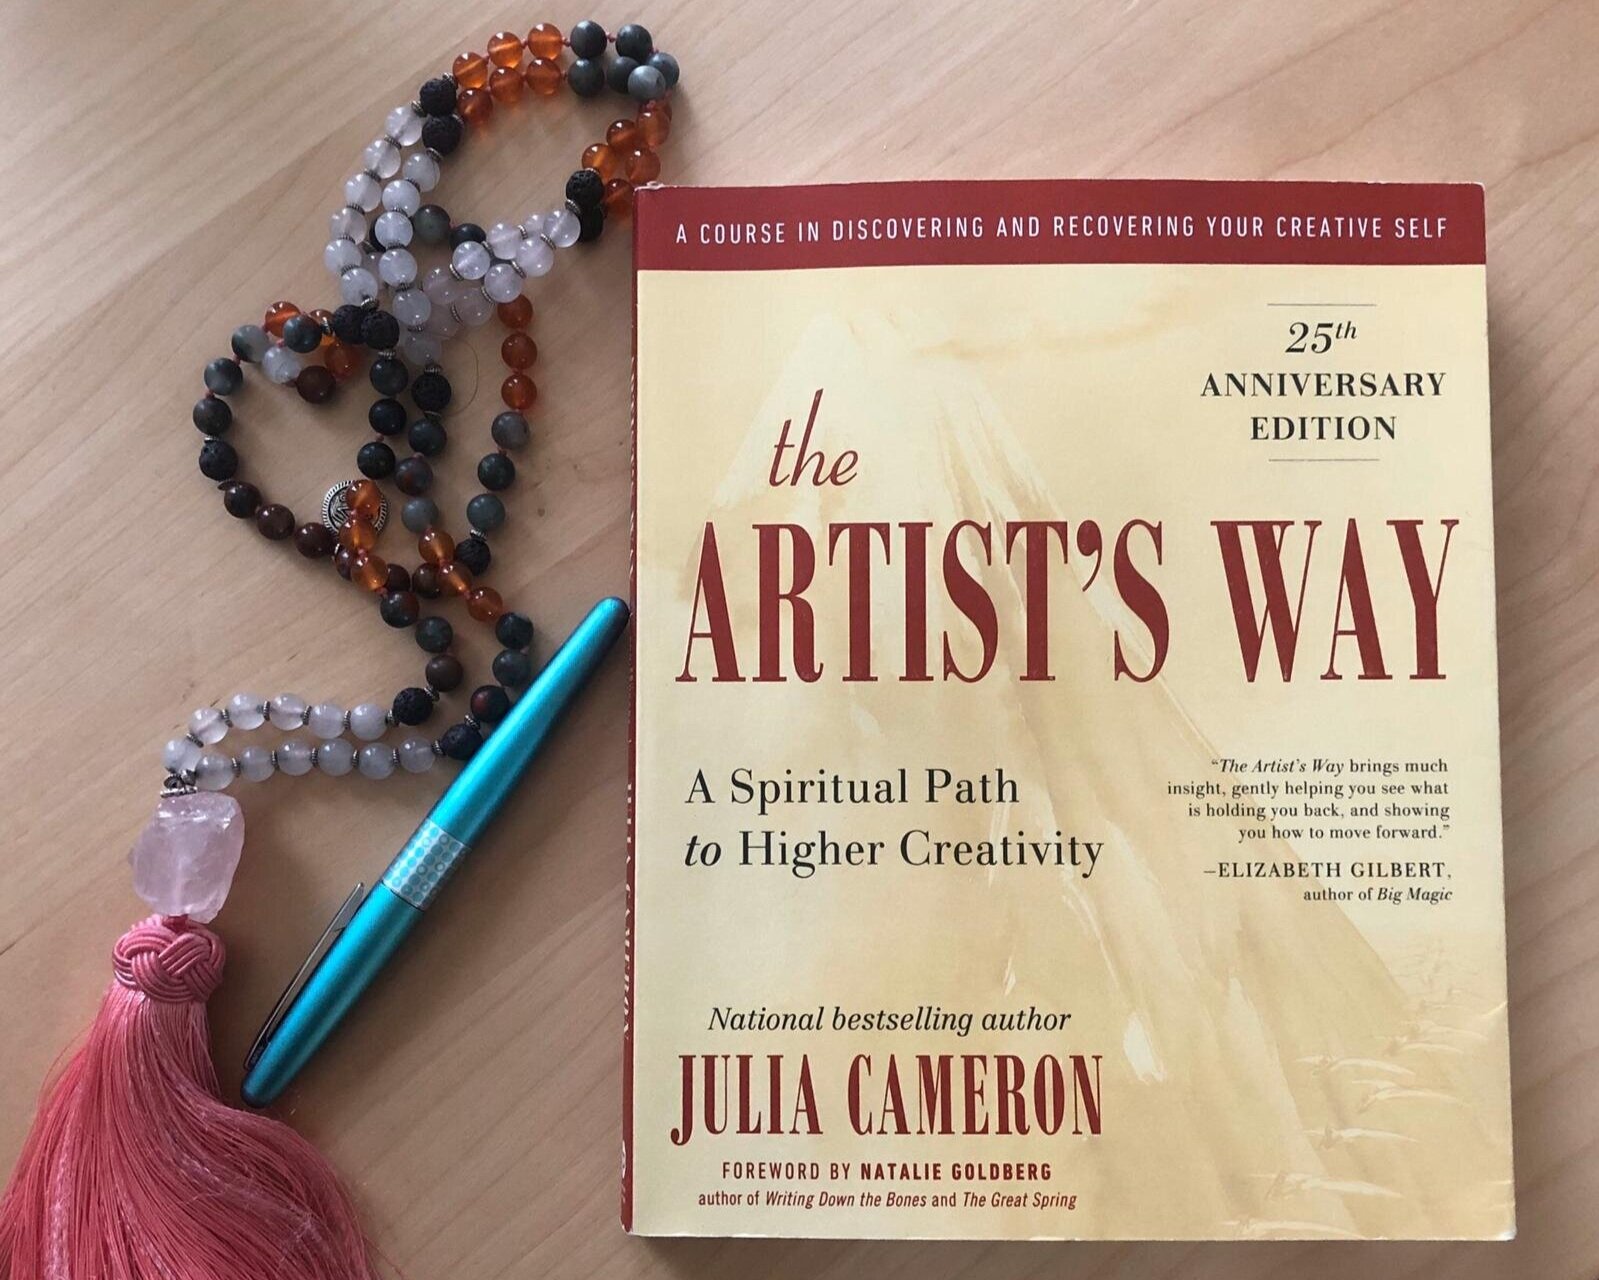 The Artist's Way by Julia Cameron - Will It Help You Be Creative